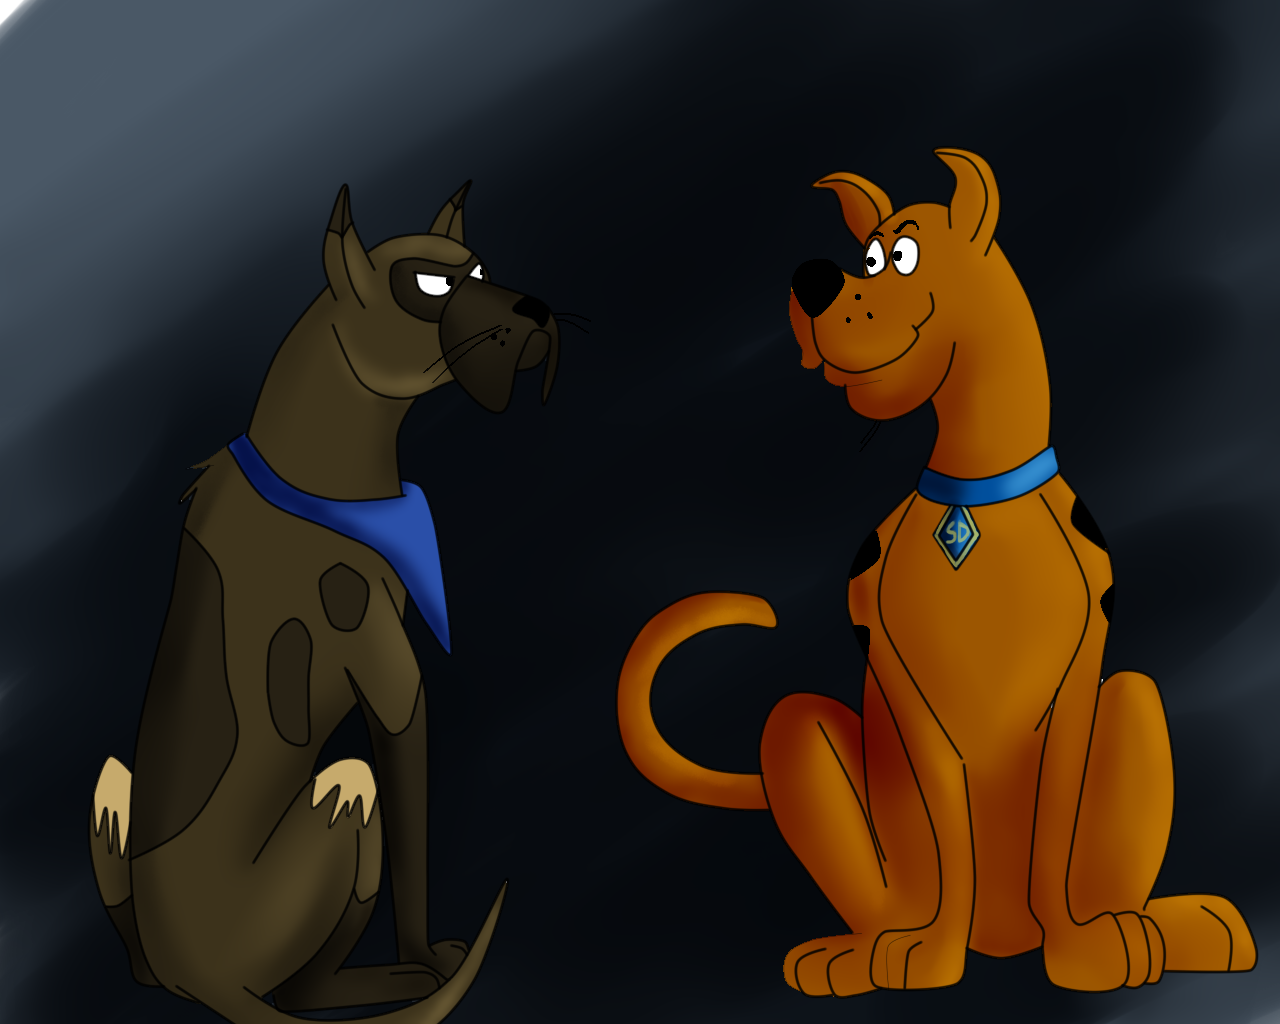 Groovy and Scooby by faunegilsaga